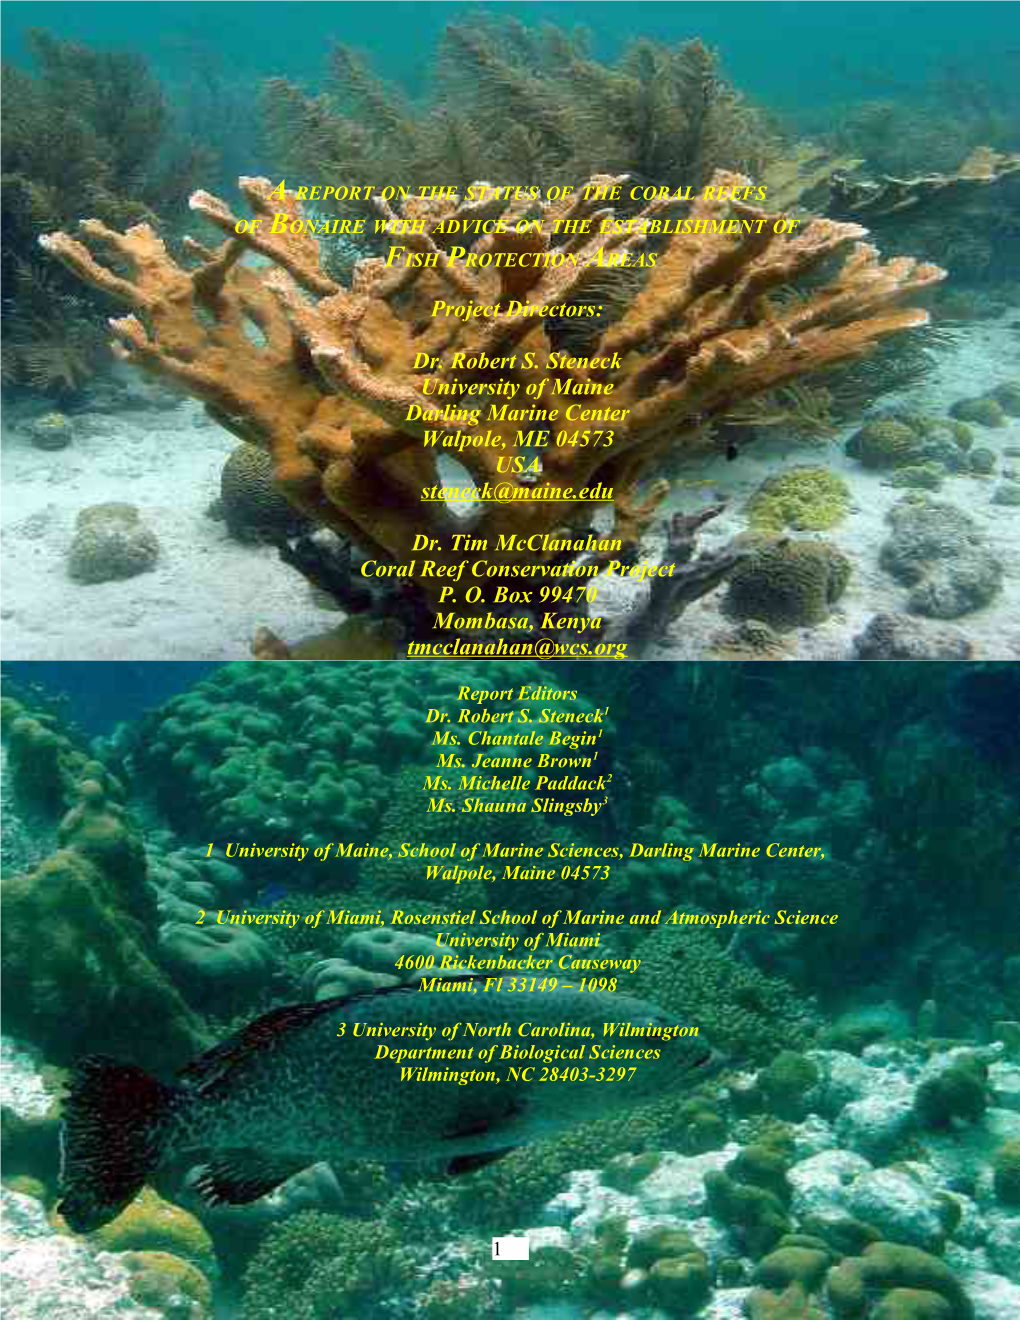 A Report on the Status of the Coral Reefs of Bonaire with Advice on the Establishment of Fish Protection Areas